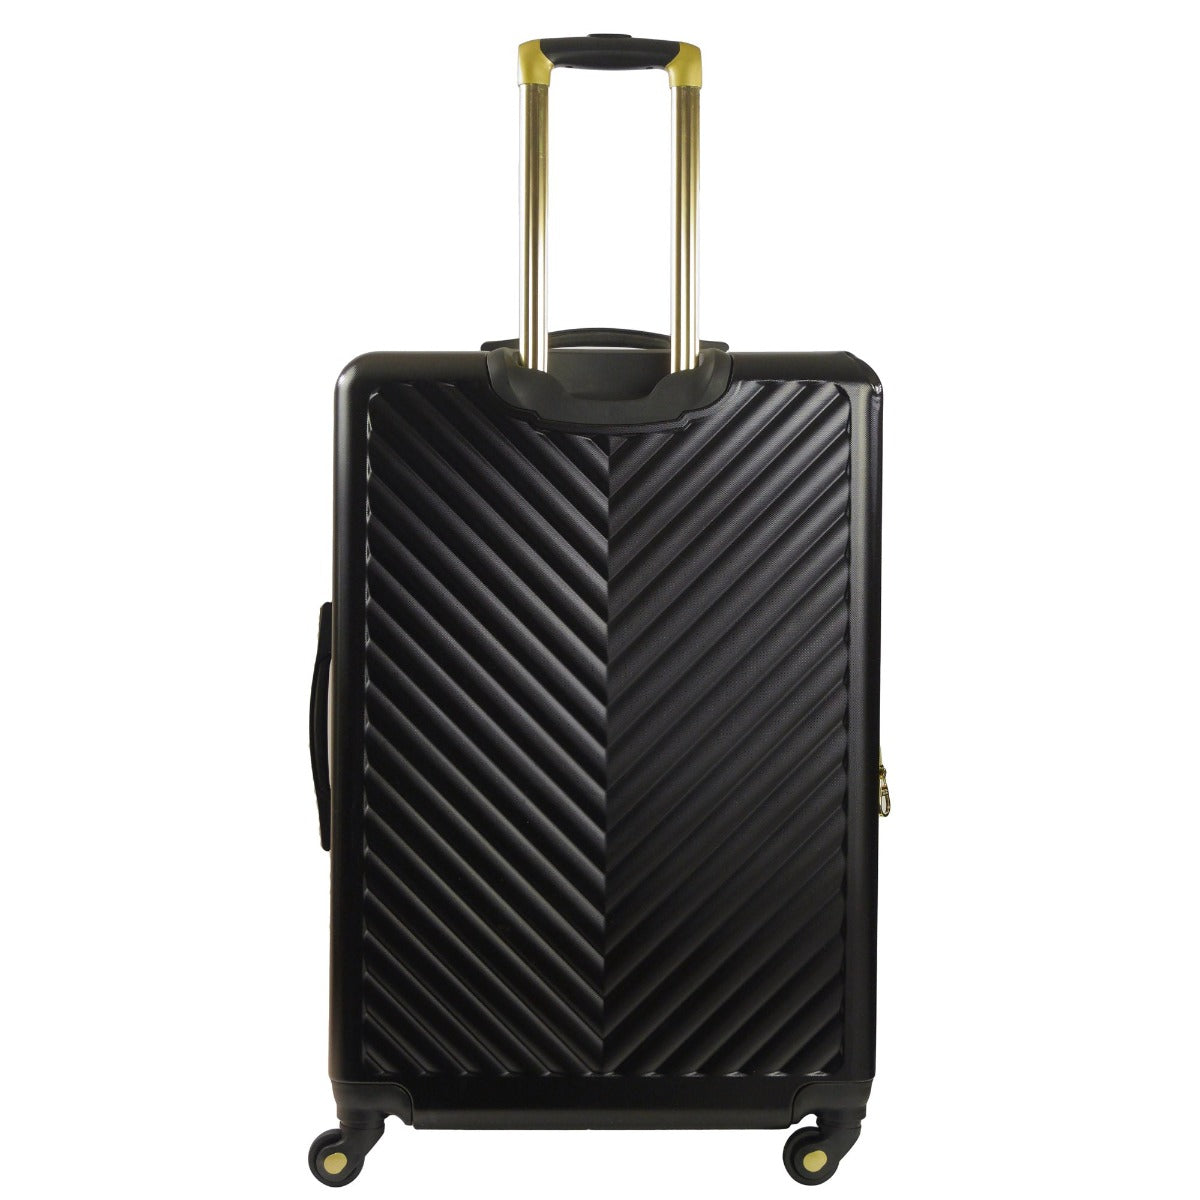 Christian Siriano Addie 29" hardside spinner suitcase black - best checked luggage for travelling